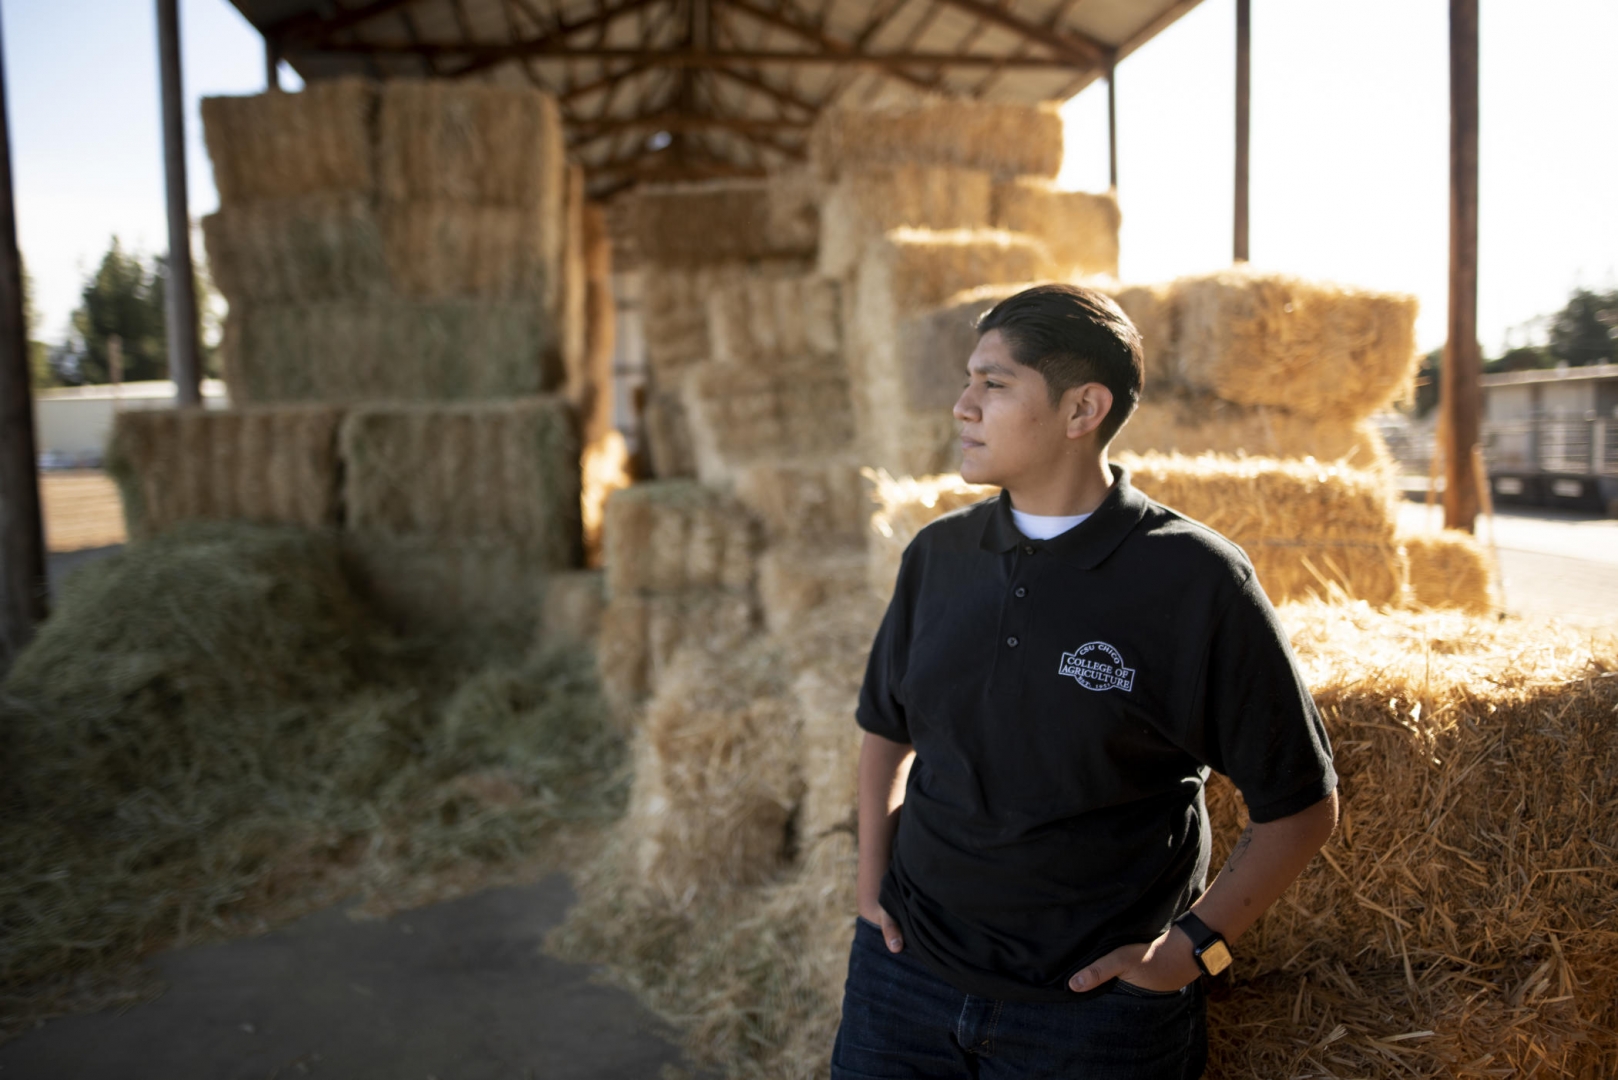 Jonathan Najera stands by some bales of hay.